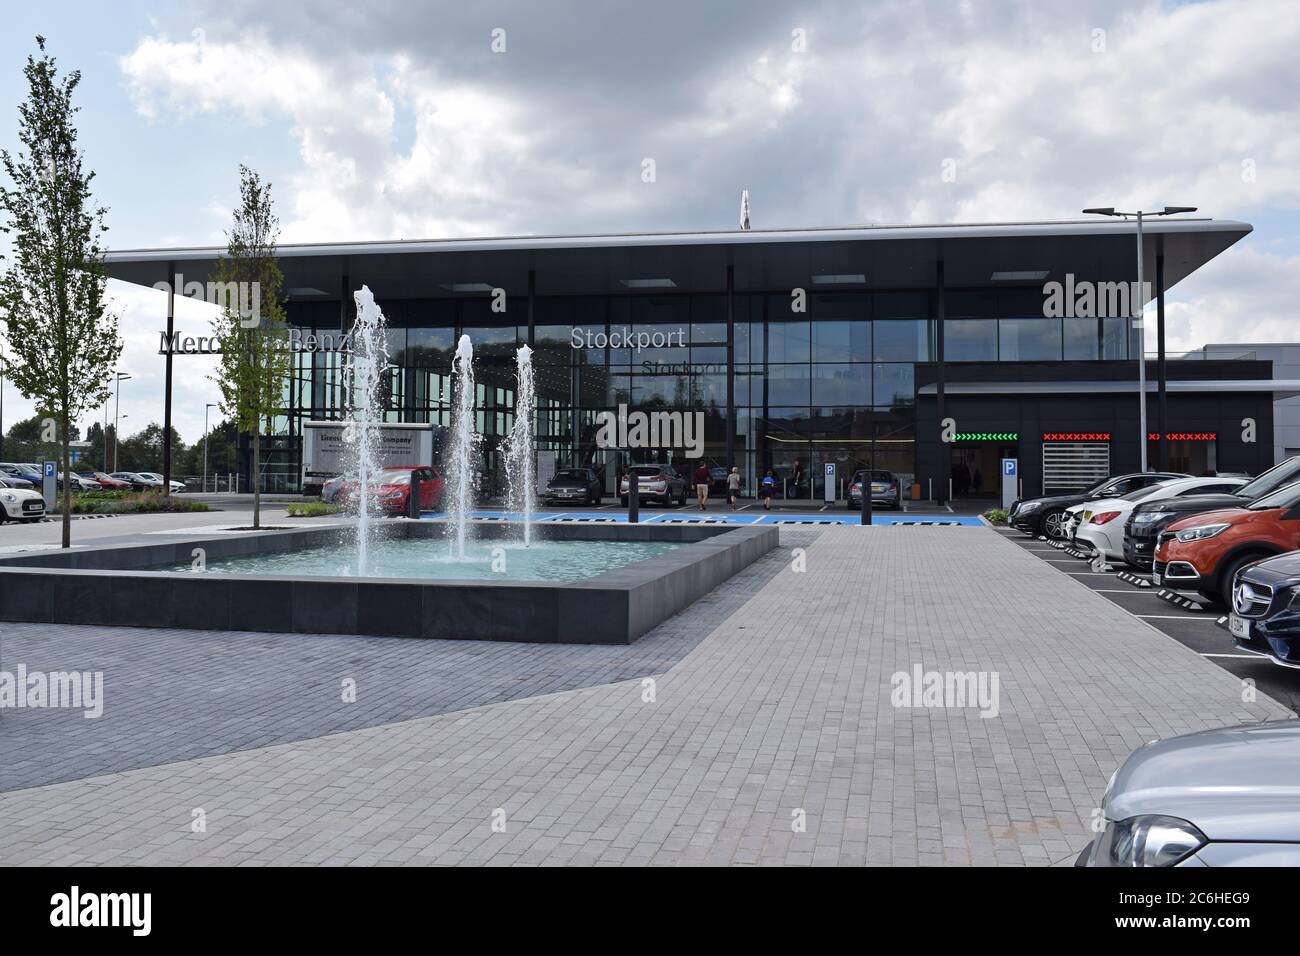 Large Mercedes Benz car dealership Stockport, UK  opened July 29, 2019. View on entering with fountains and parked cars. Stock Photo